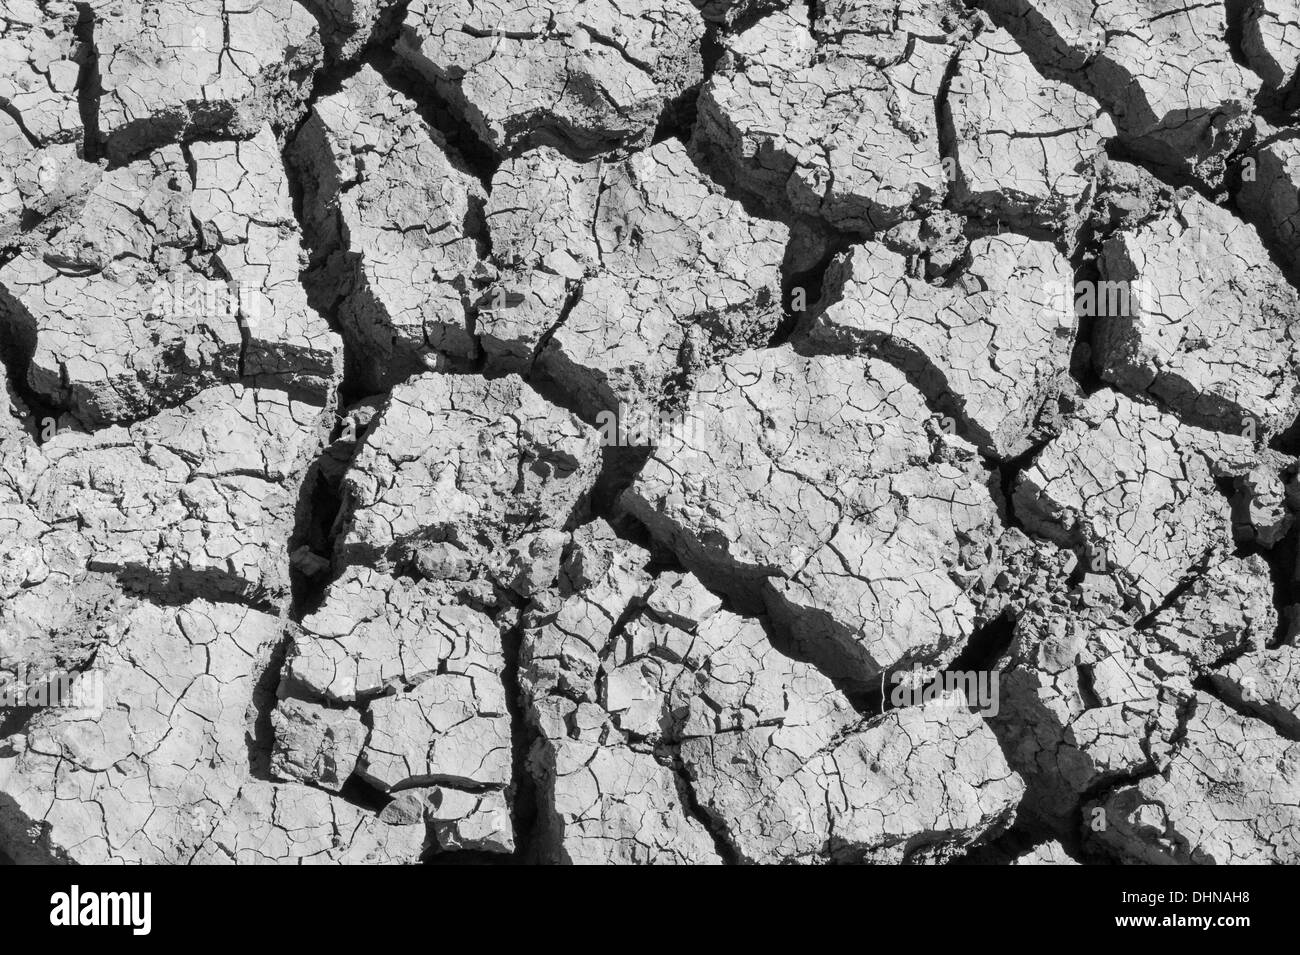 Dried and cracked mud soil - black & white Stock Photo